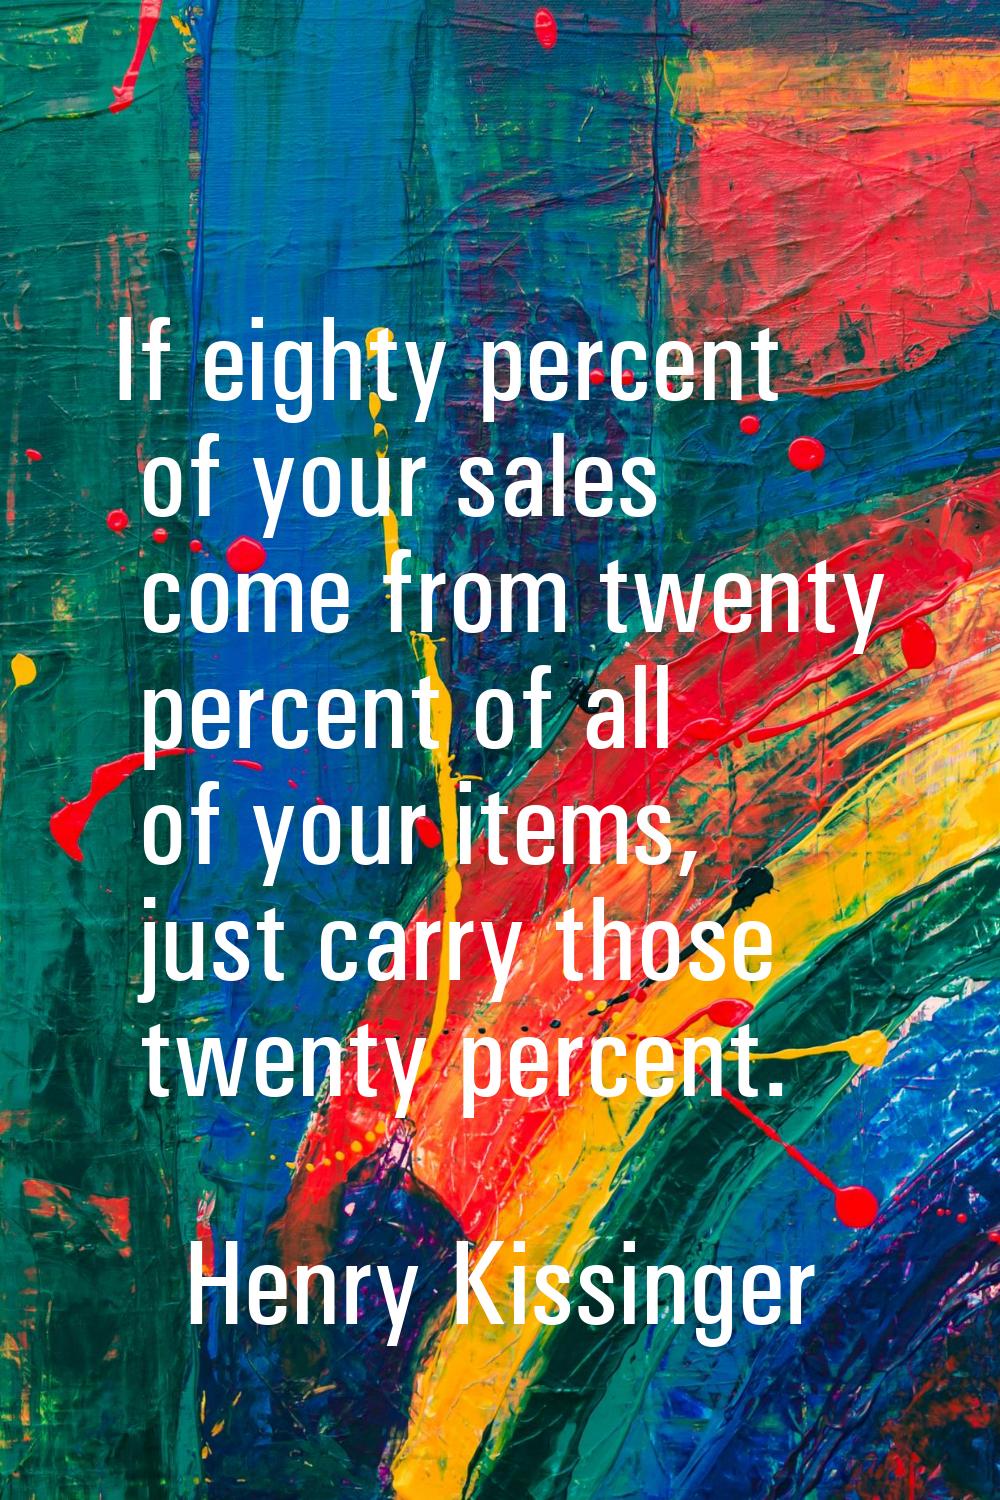 If eighty percent of your sales come from twenty percent of all of your items, just carry those twe